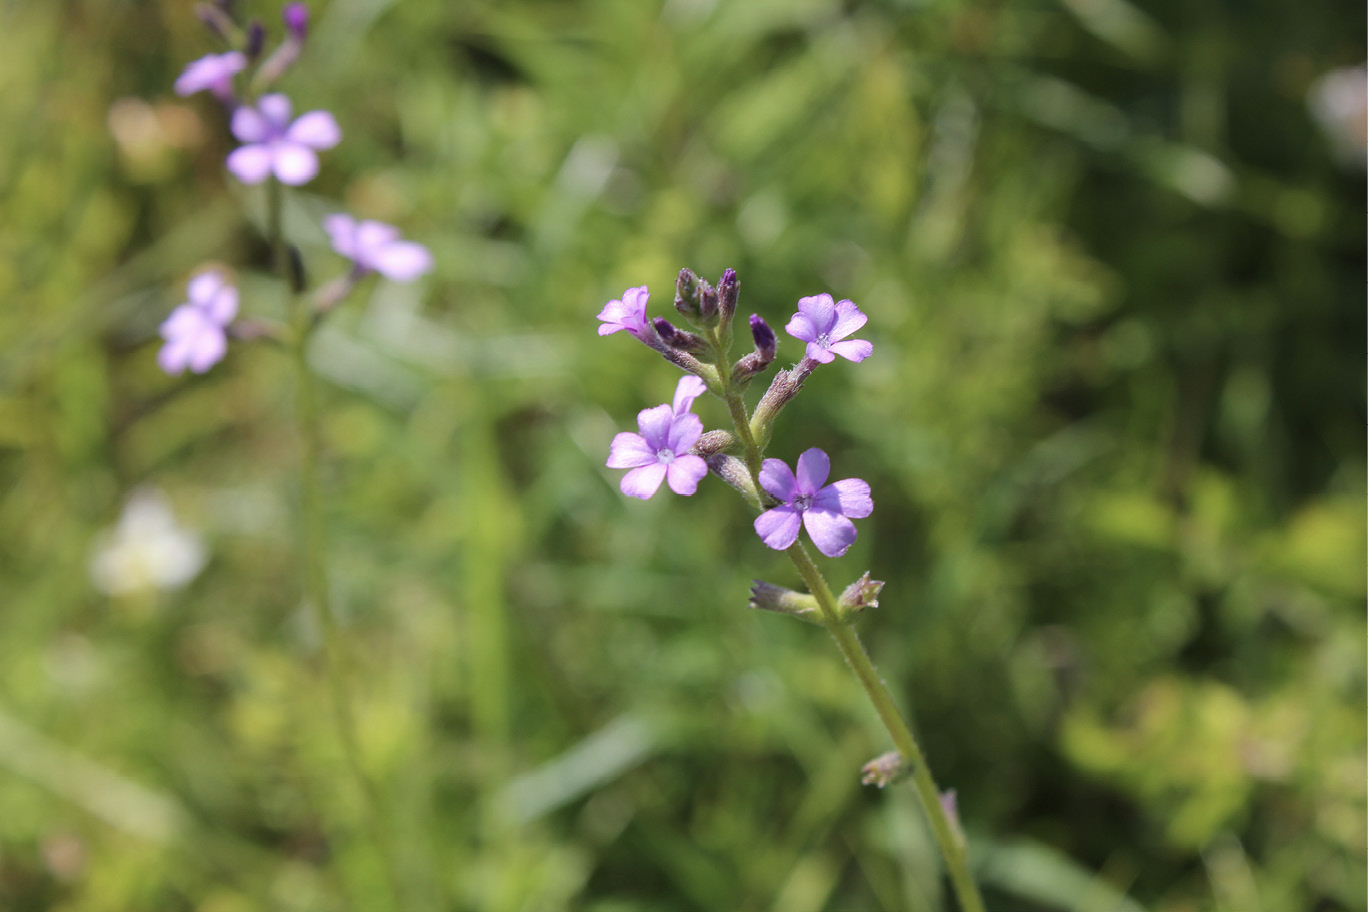 Native verbena plant, purple flowers with a blurred green background.